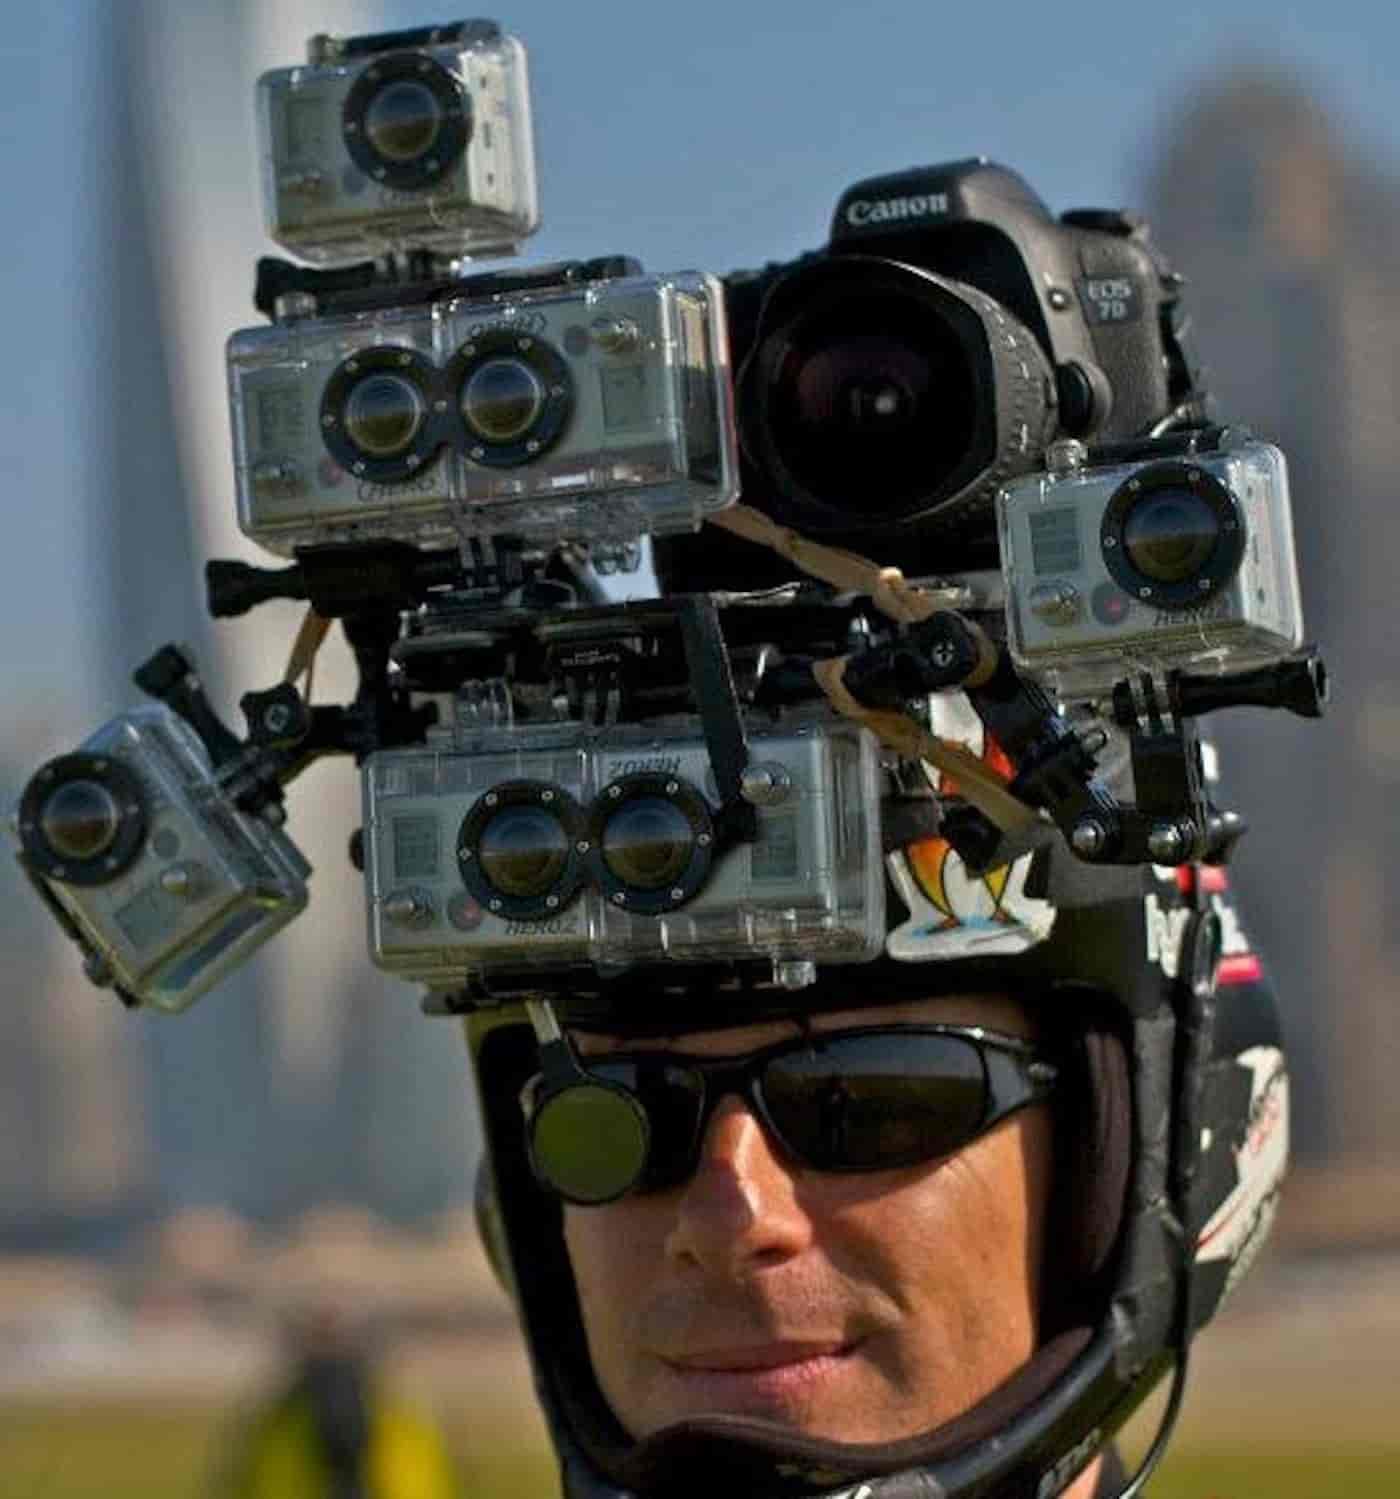 Gopro professional guide to filmmaking torrent download